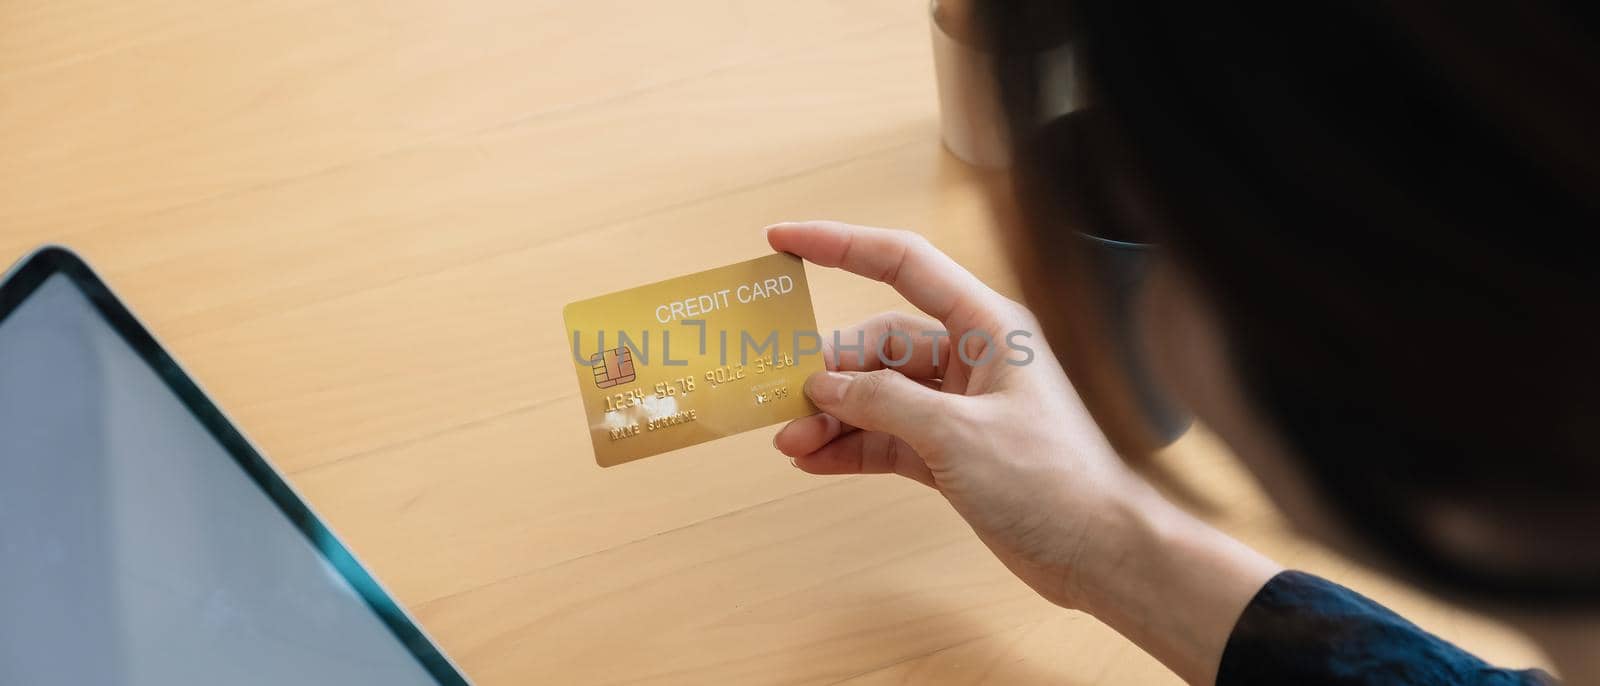 Close up of woman holding credit card and using digital tablet. Businesswoman working at home. Online shopping, e-commerce, internet banking, spending money, working from home concept